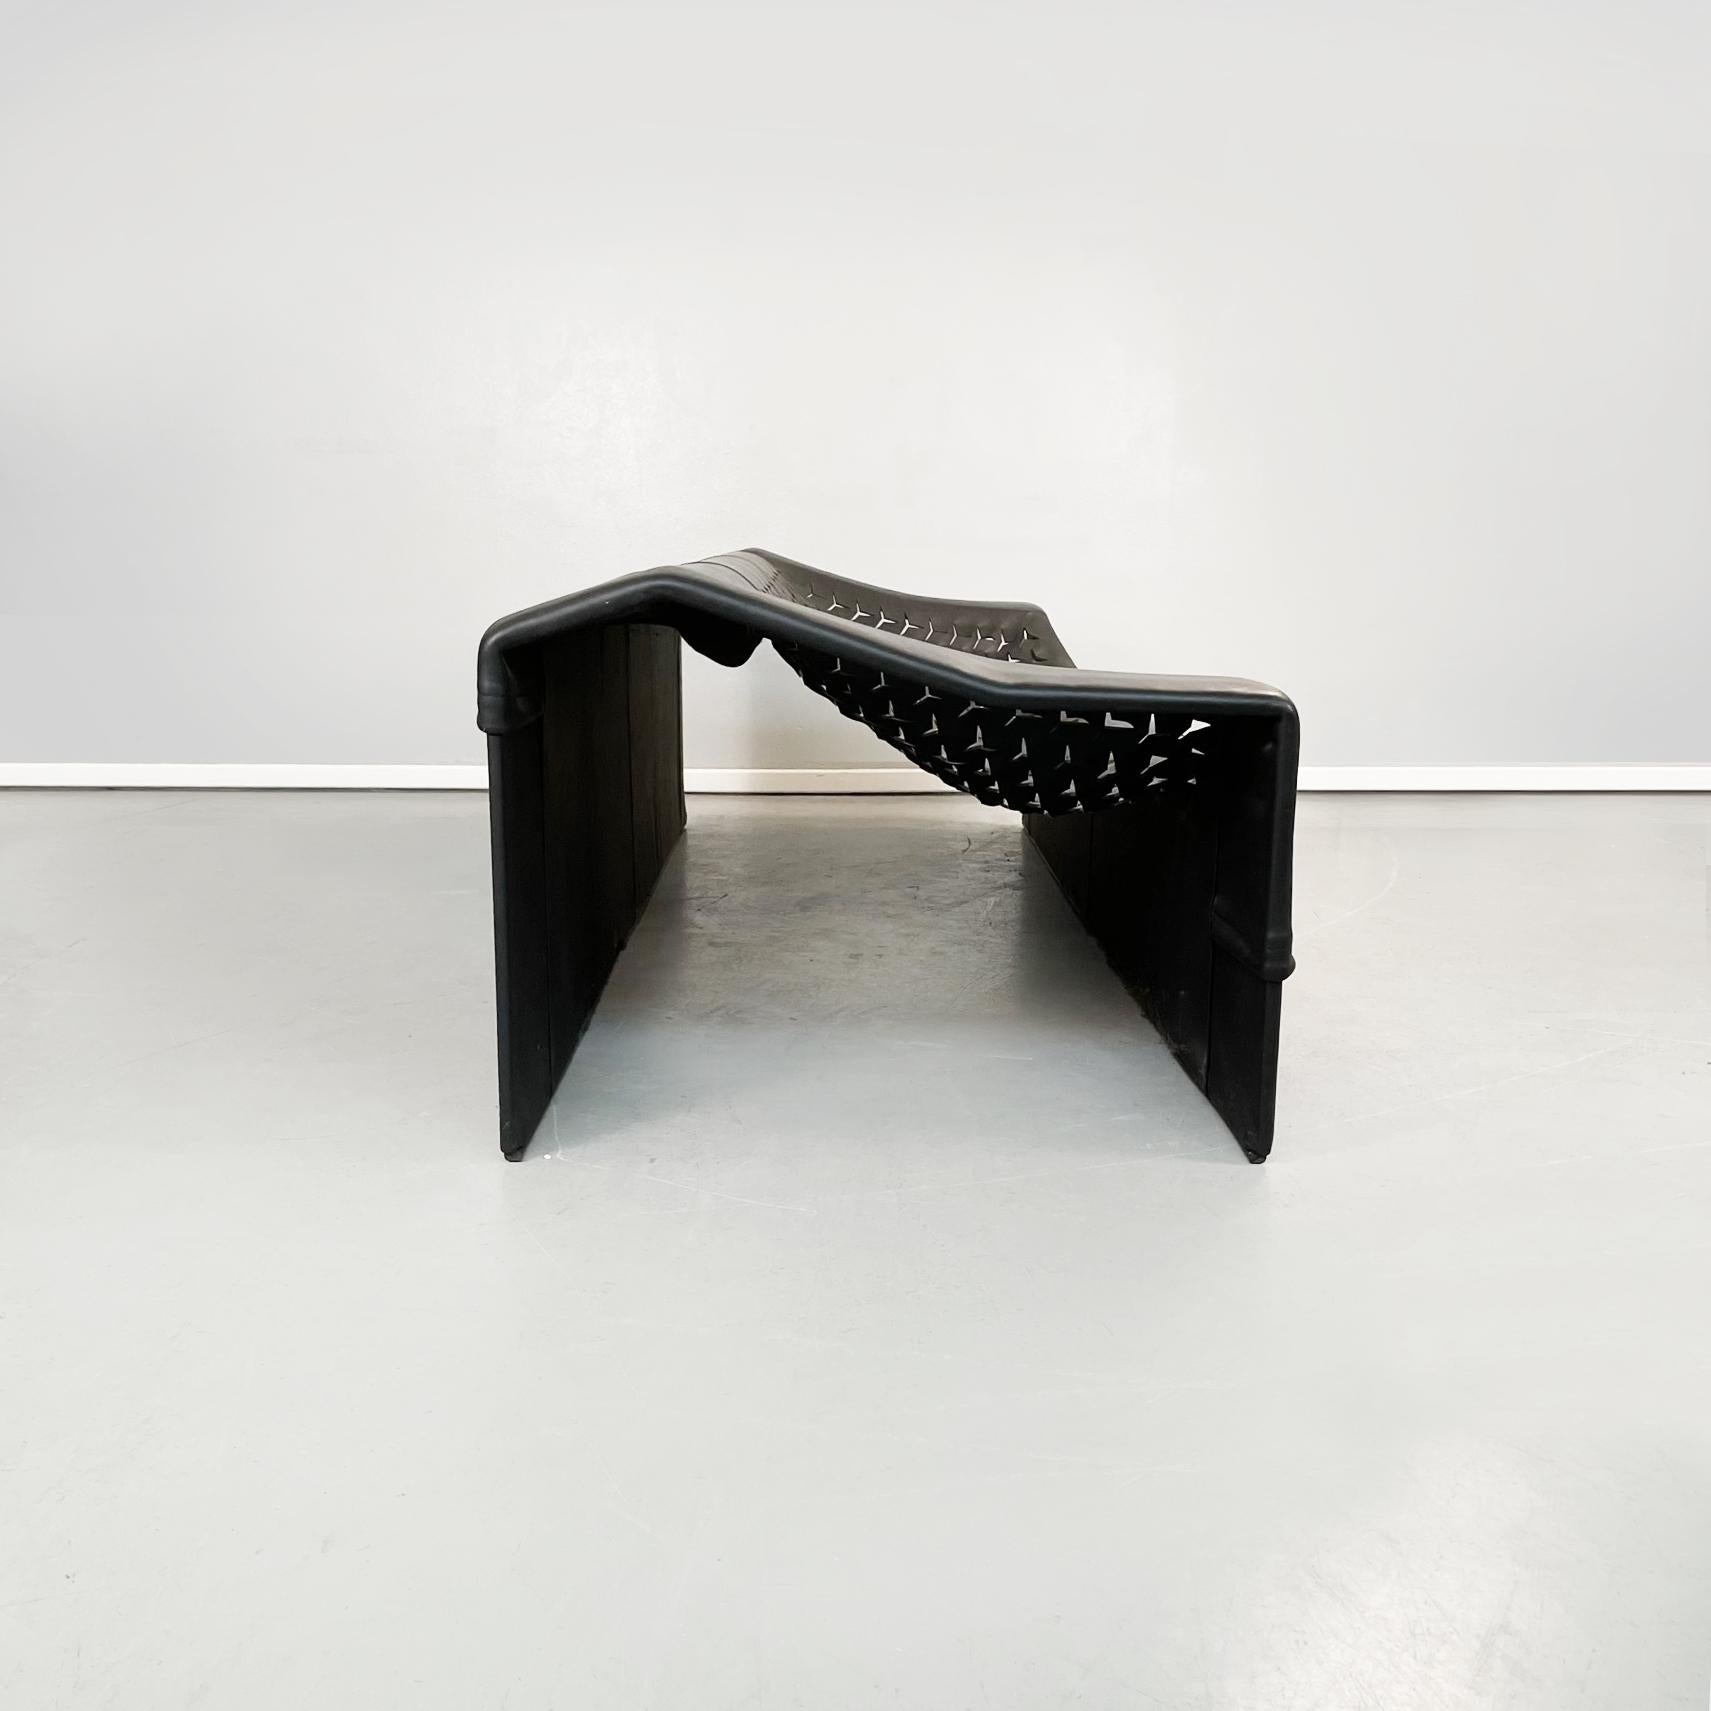 Post-Modern Italian Modern Black Leather Sofa Skin by Jean Nouvel for Molteni & C., 2000s